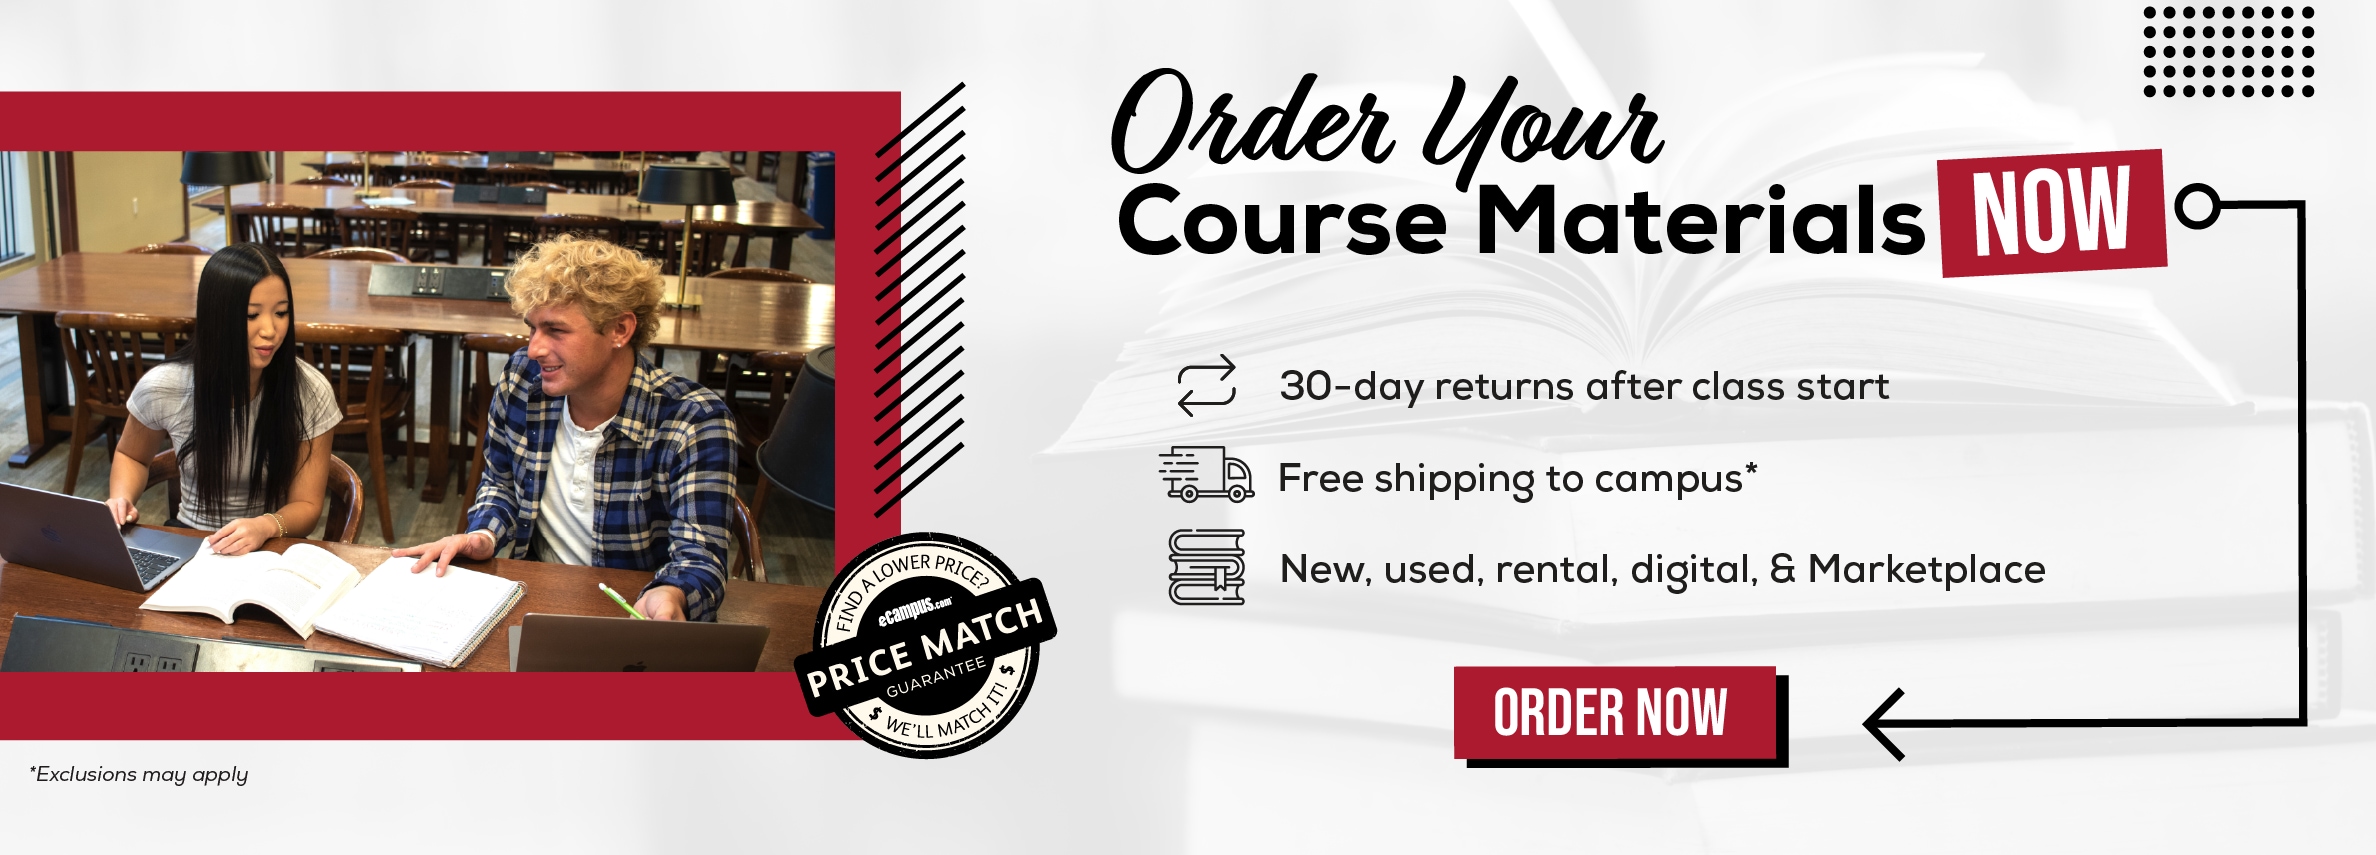 Order Your Course Materials Now. 30-day returns after class start. Free shipping to campus*. New, used, rental, digital, & Marketplace. Order now. *Exclusions may apply.